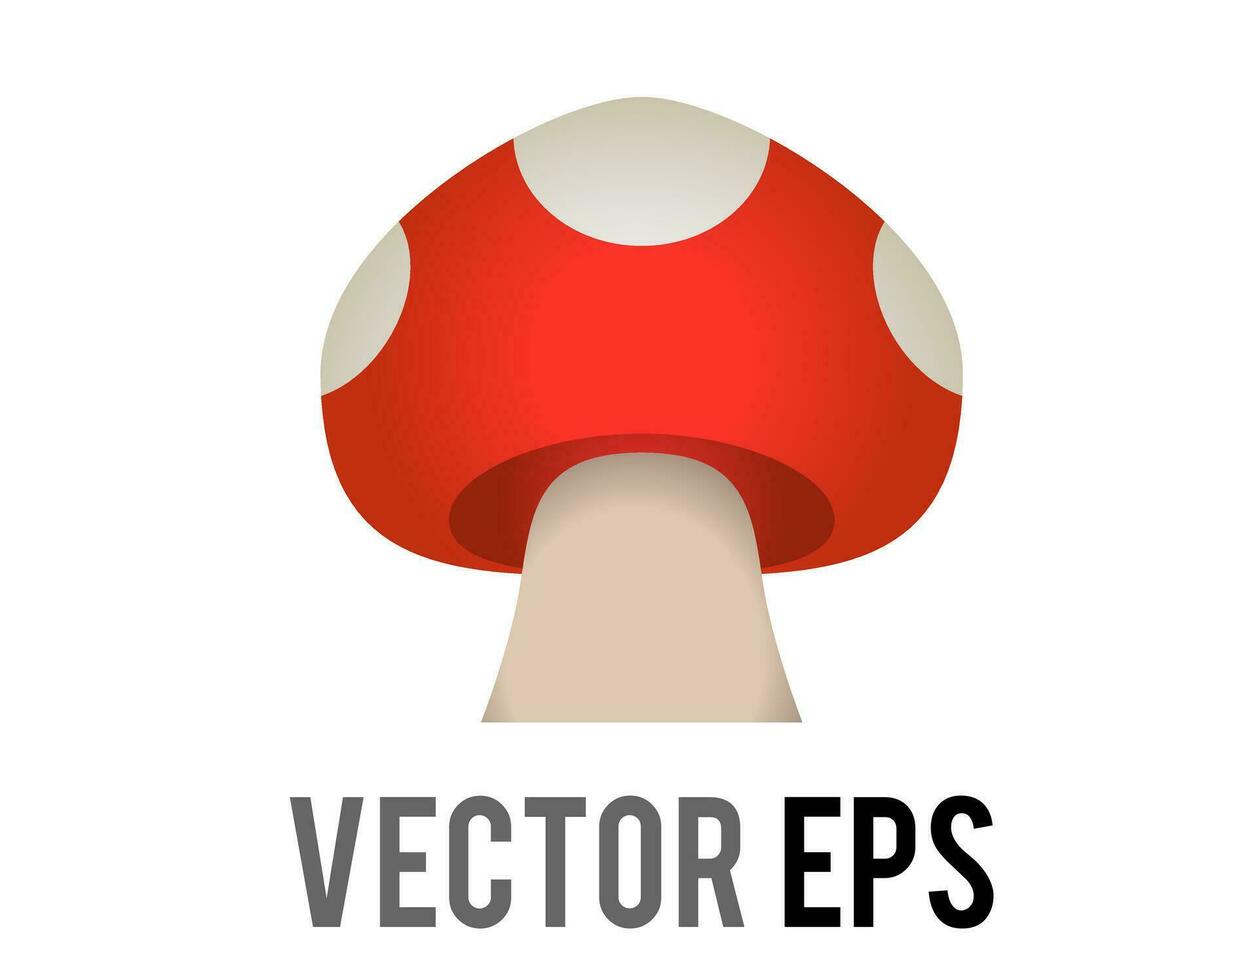 Vector edible fungus of white spotted red cap mushroom icon